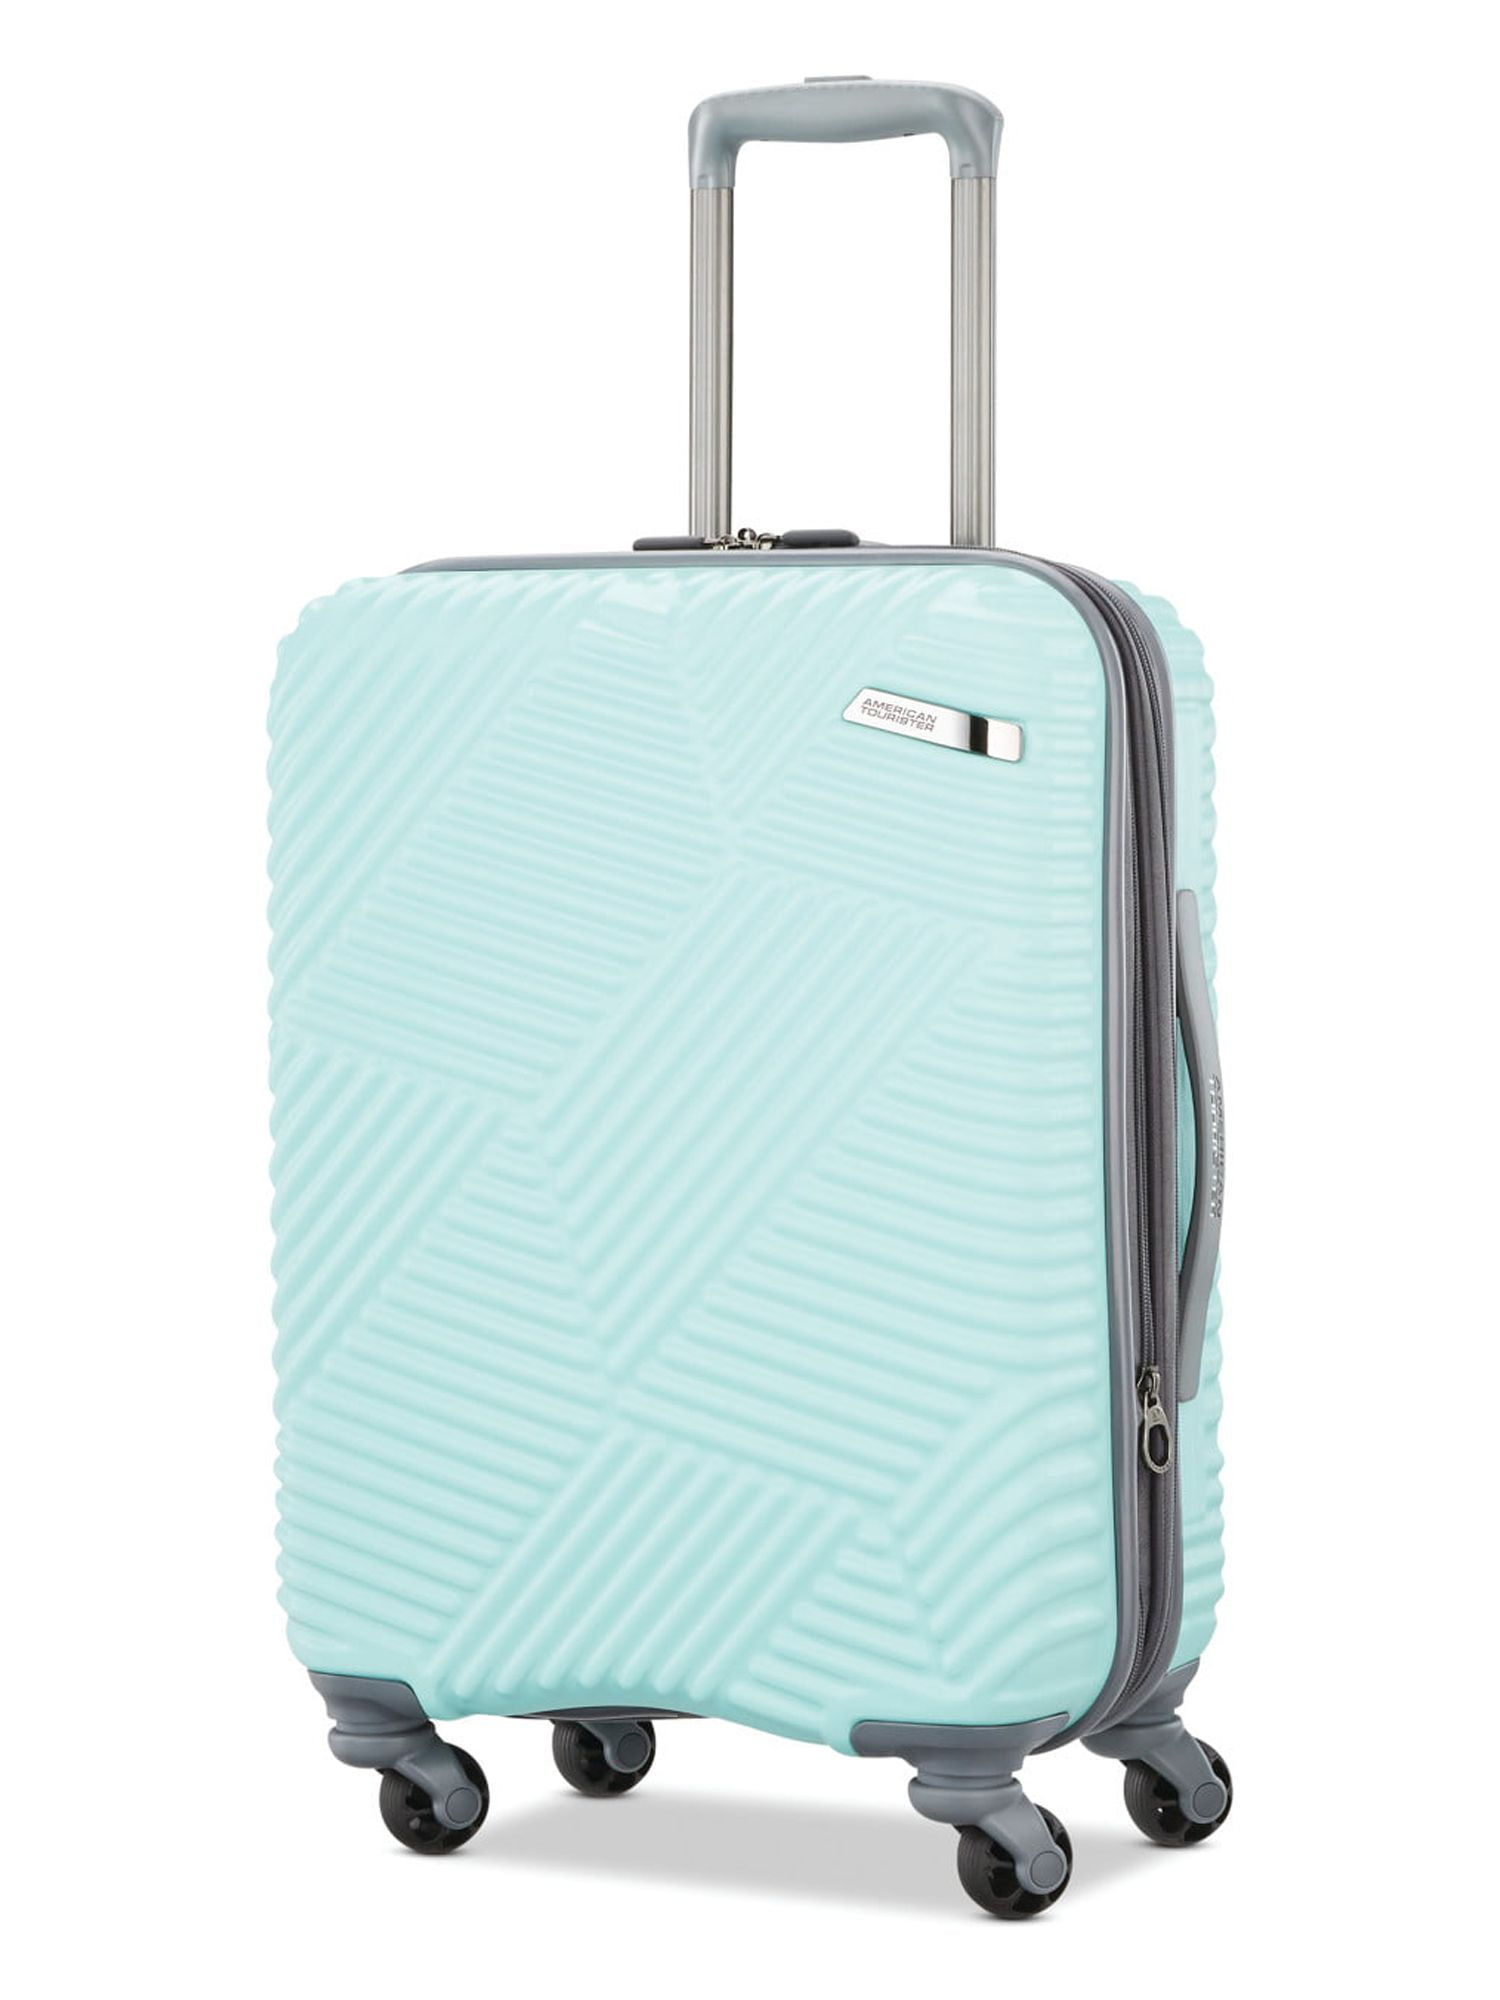 American Tourister Airweave 20-inch Hardside Spinner, Carry-On